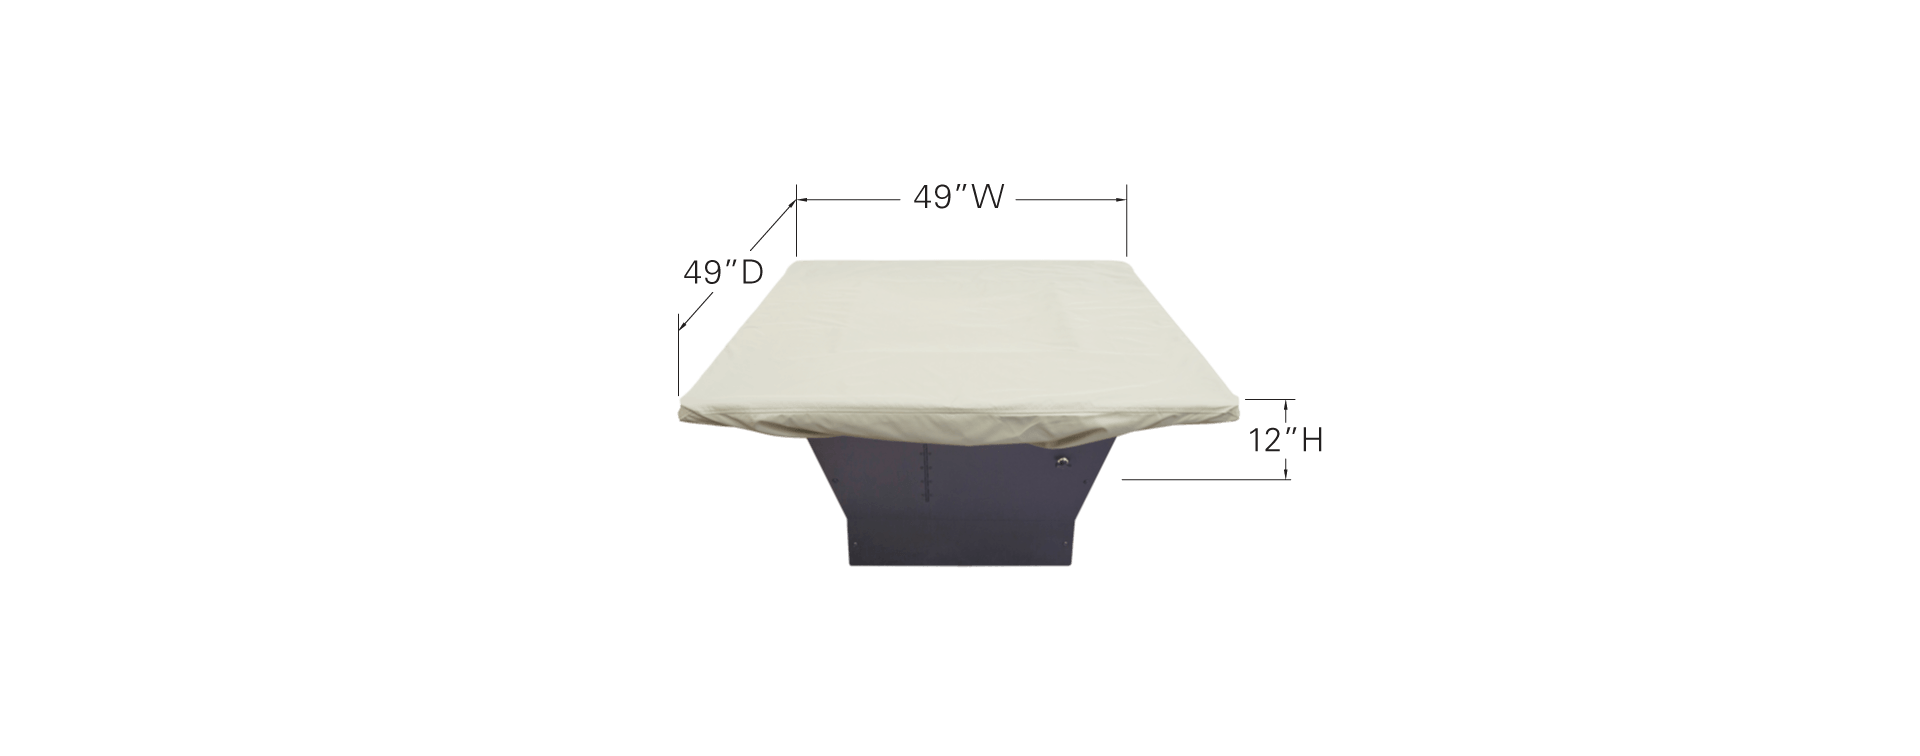 Fits 42" to 48" Square Fire Pit/Table/Ottoman Protective Cover